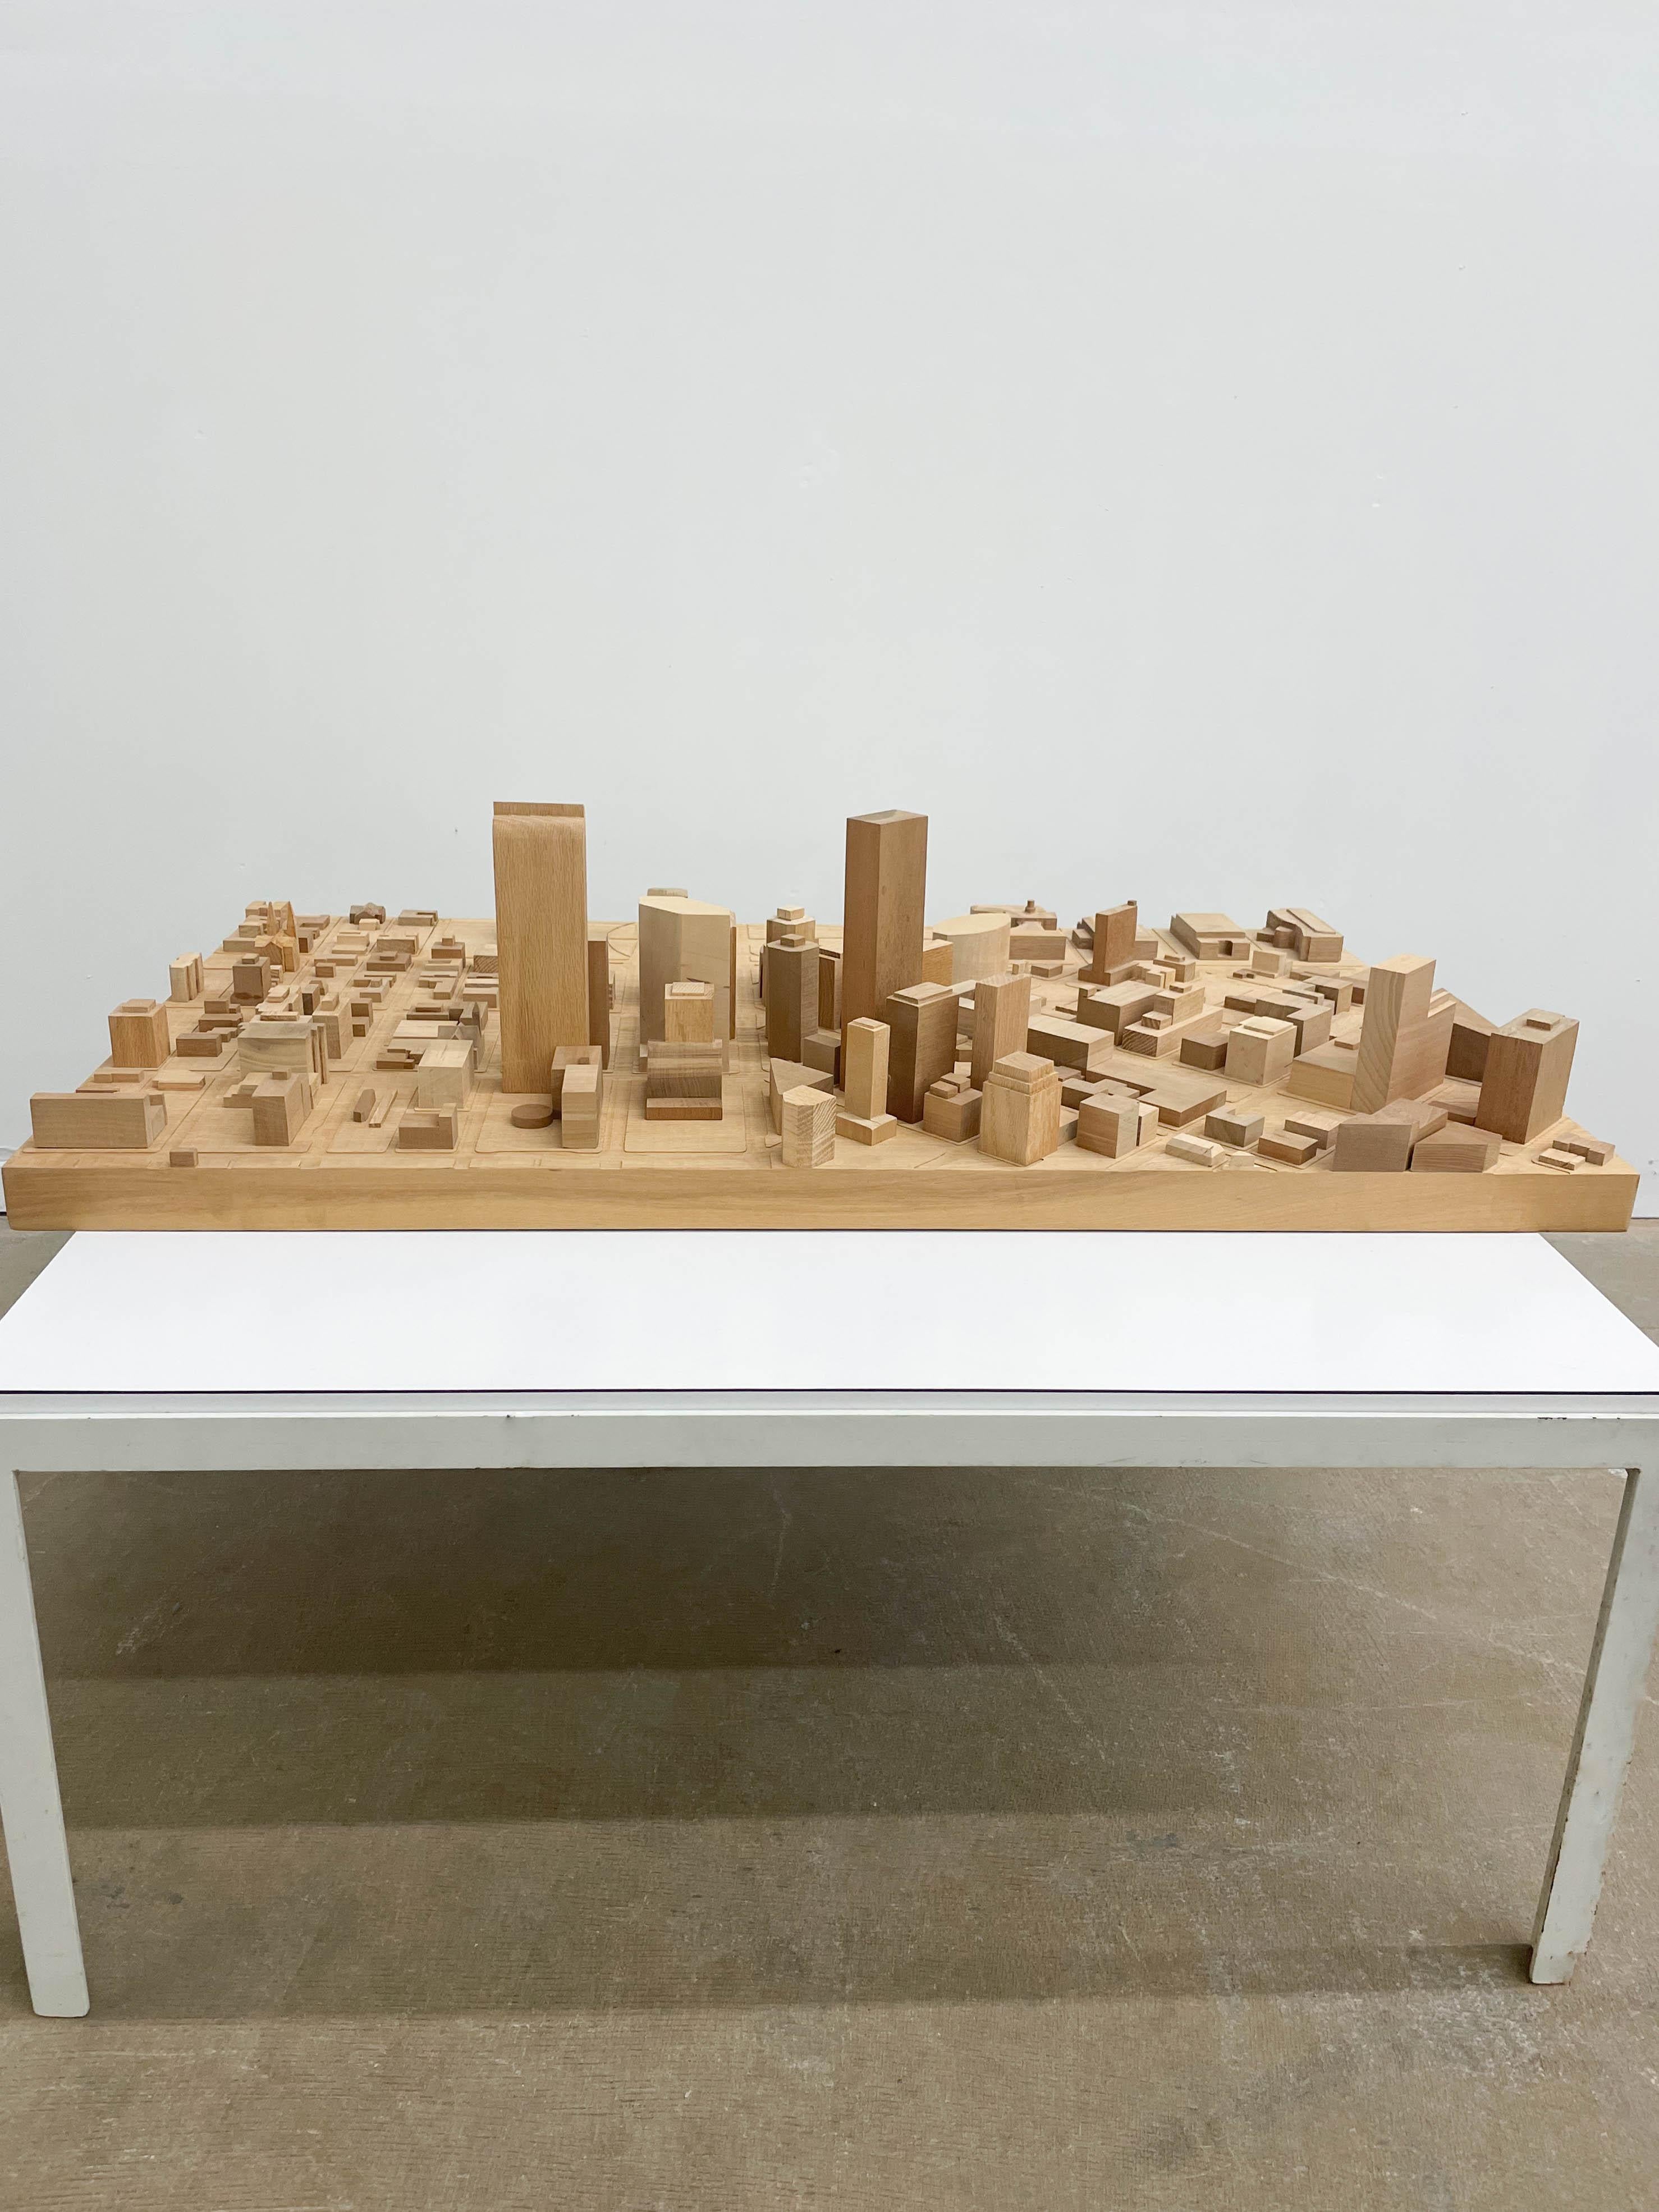 Beautiful architect’s model of downtown Denver, CO. in solid wood. Featuring a CNC base of streets and open spaces, individual buildings are modeled to scale in a variety of woods. Makes for an intriguing objet d’art when placed flat or hung on the